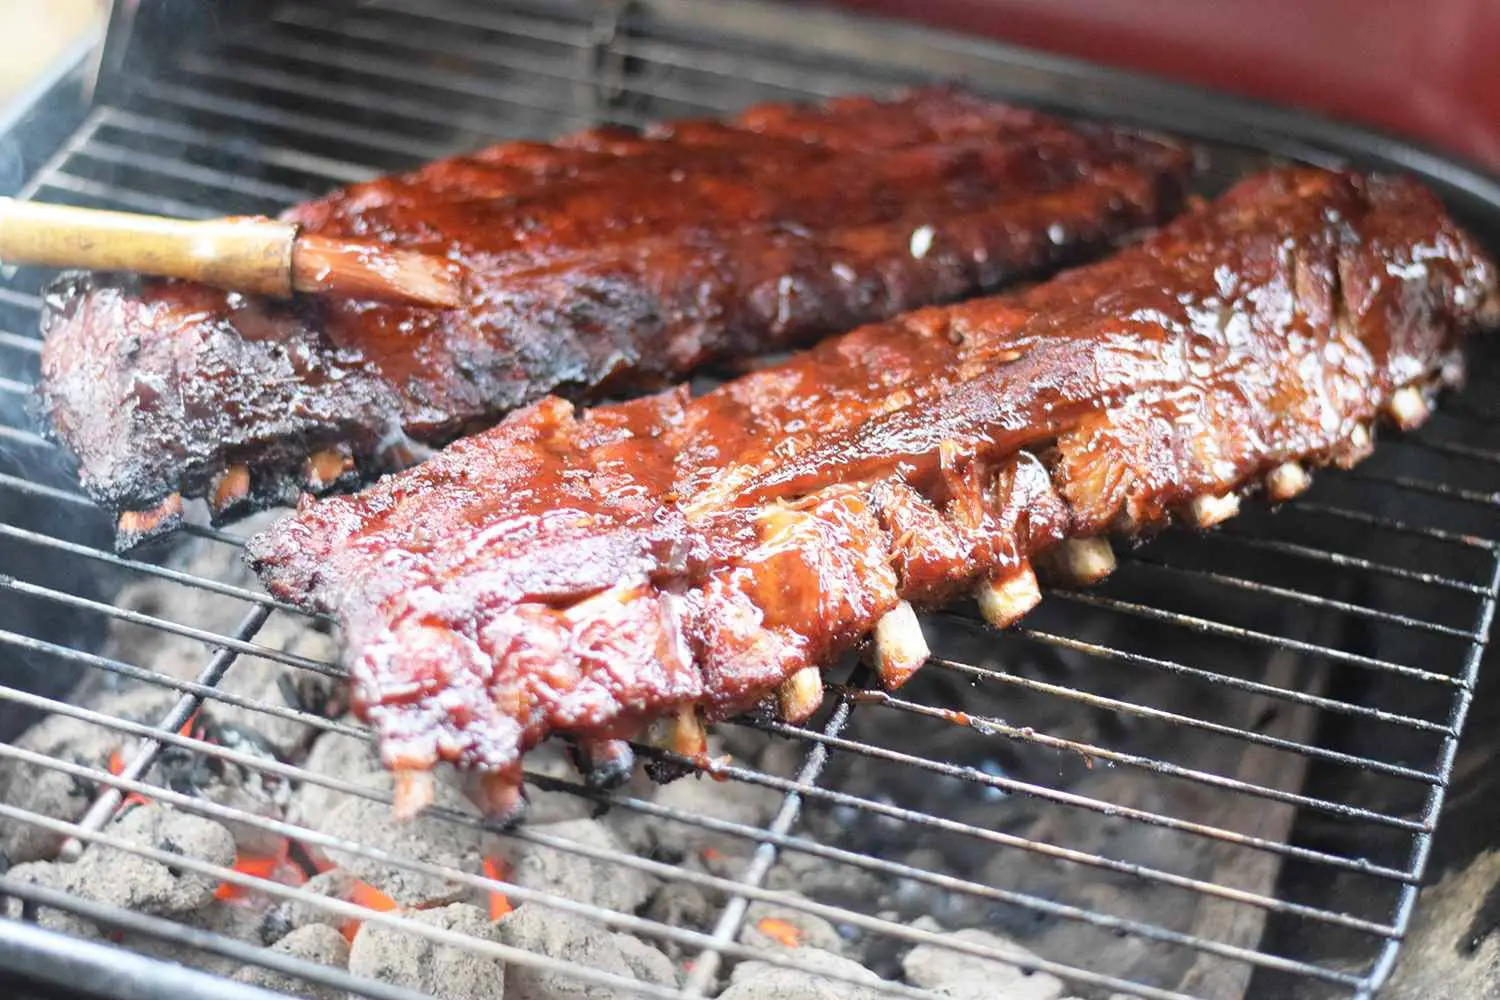 How To Cook A Rack Of Ribs On The Grill